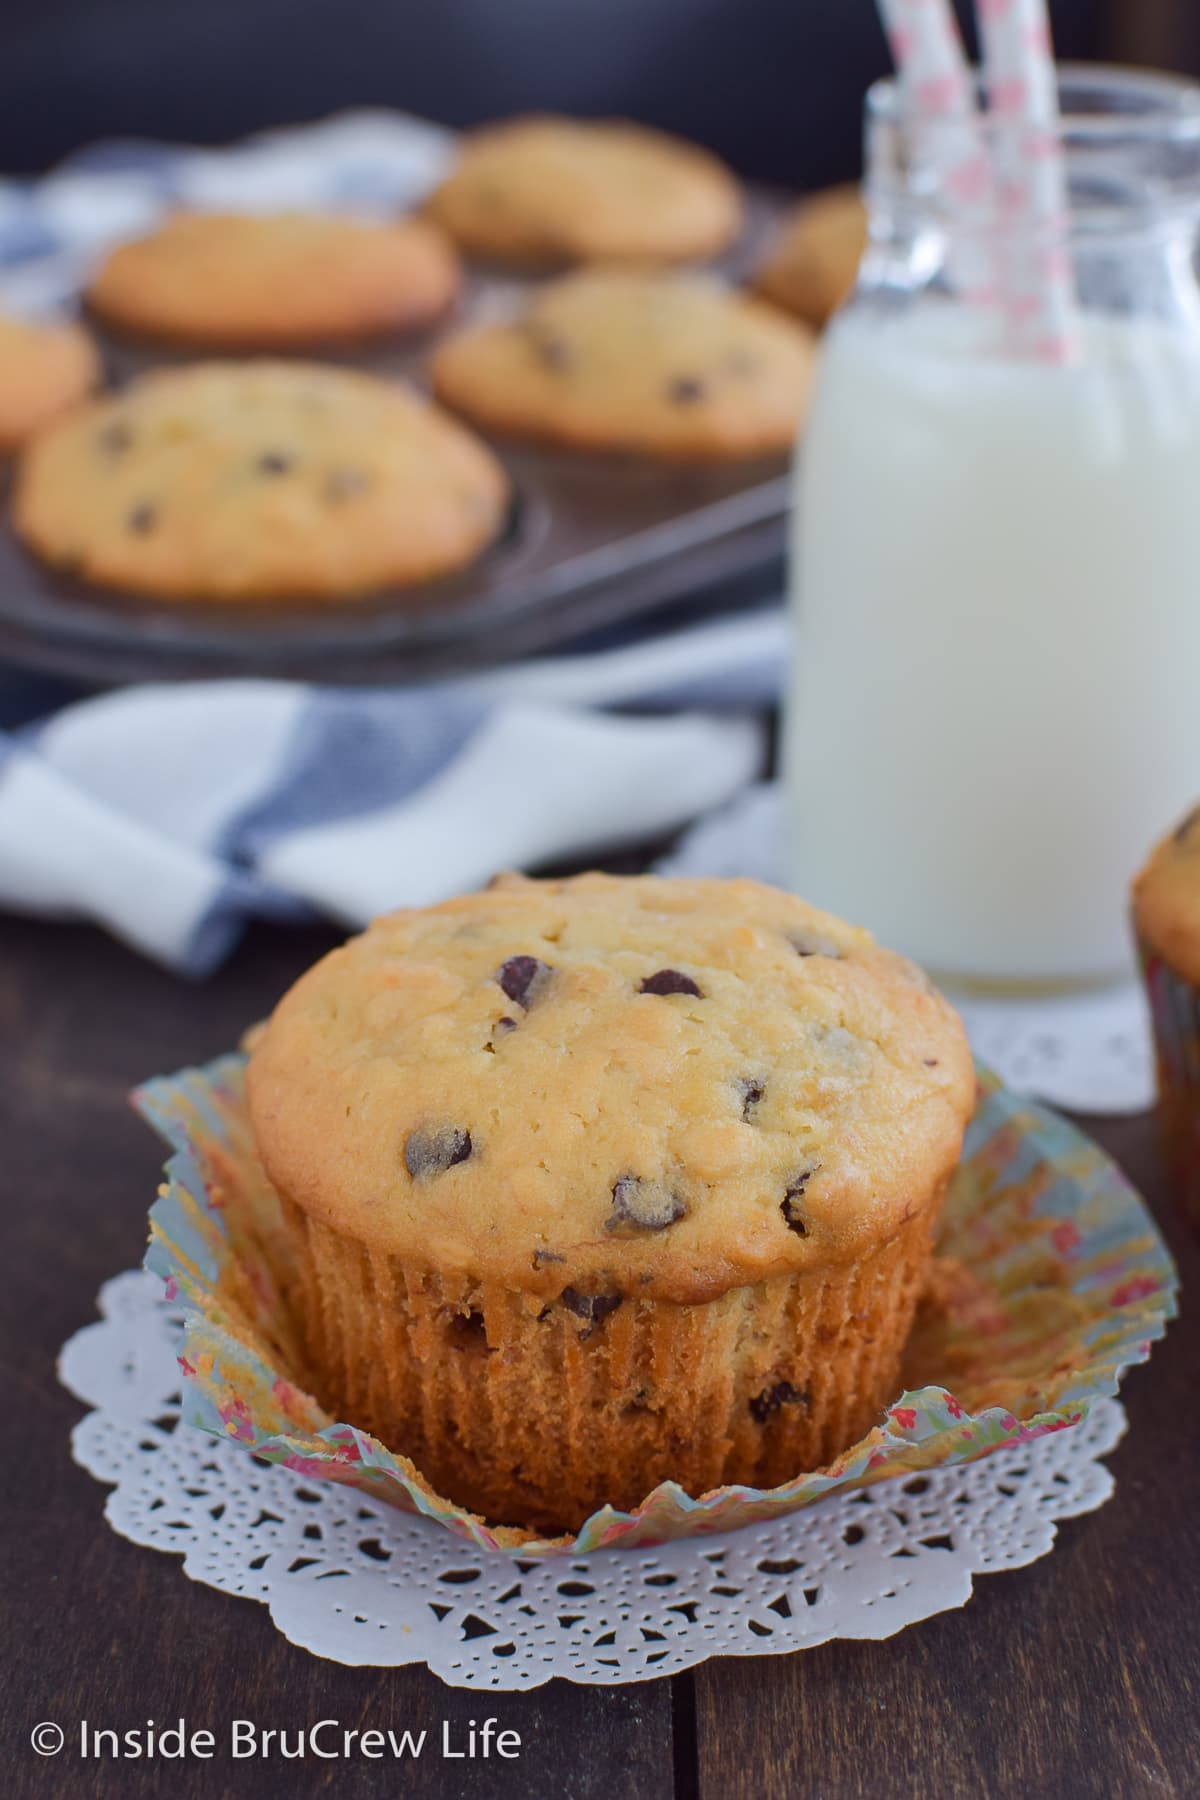 A fluffy banana muffin with chocolate chips on a paper liner.